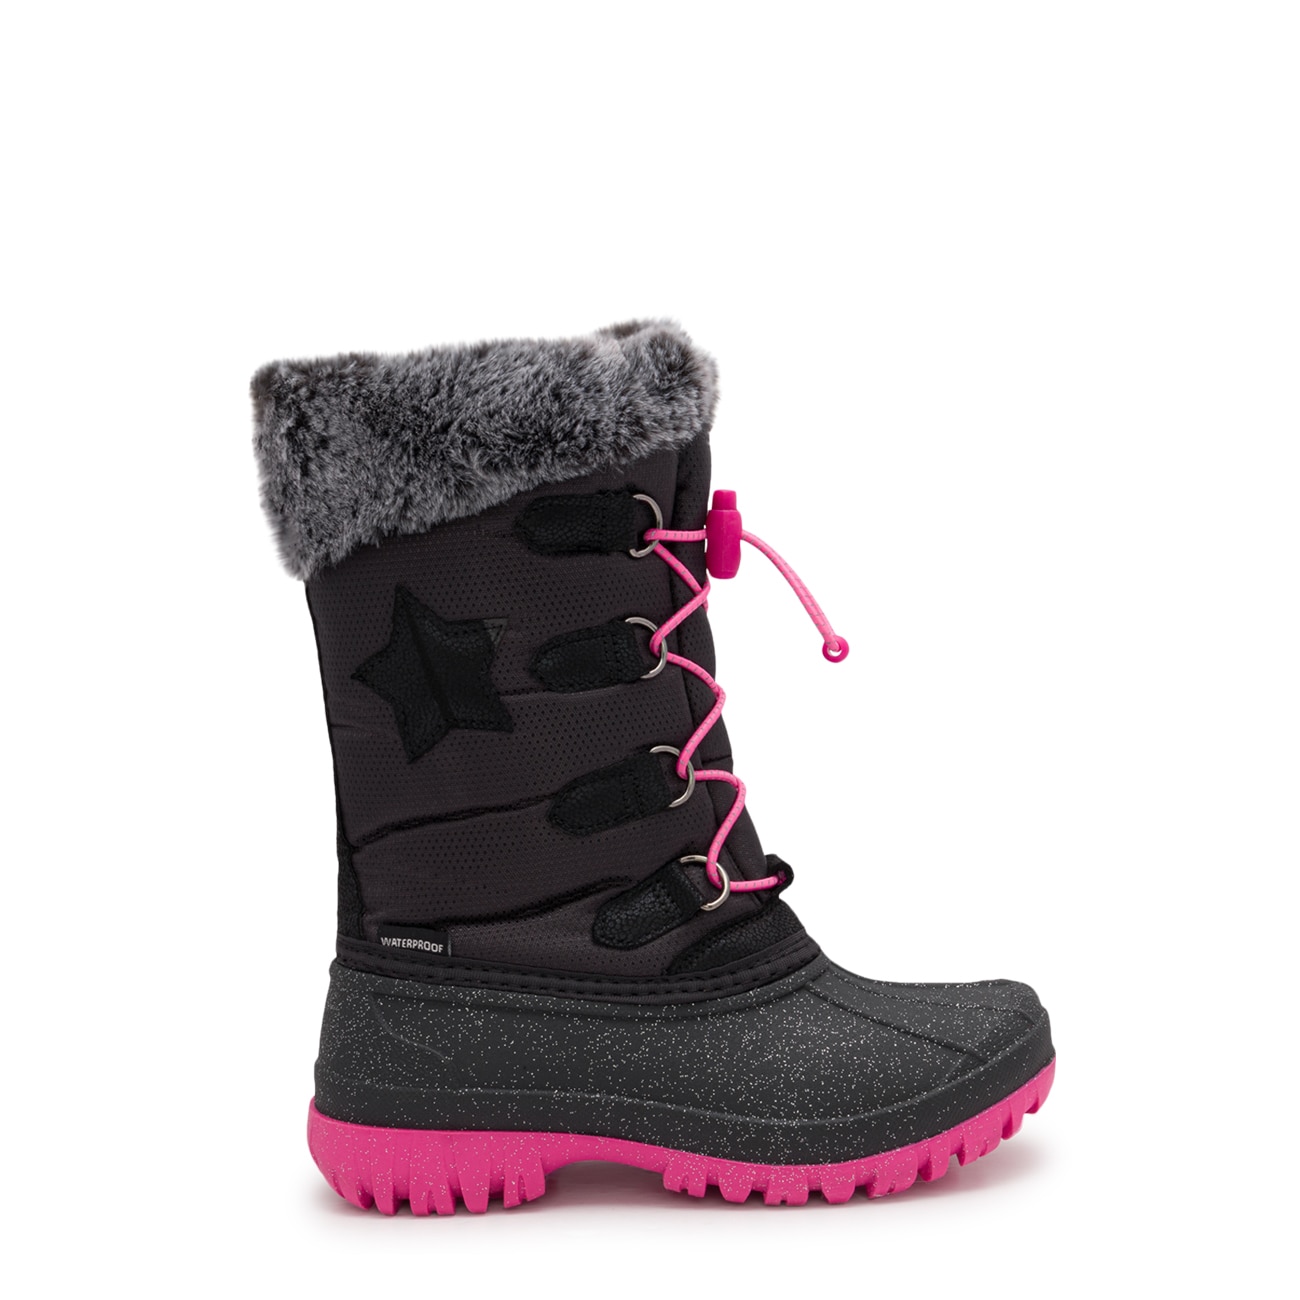 Elements Youth Girls' Star Pac Waterproof Winter Boot | The Shoe Company